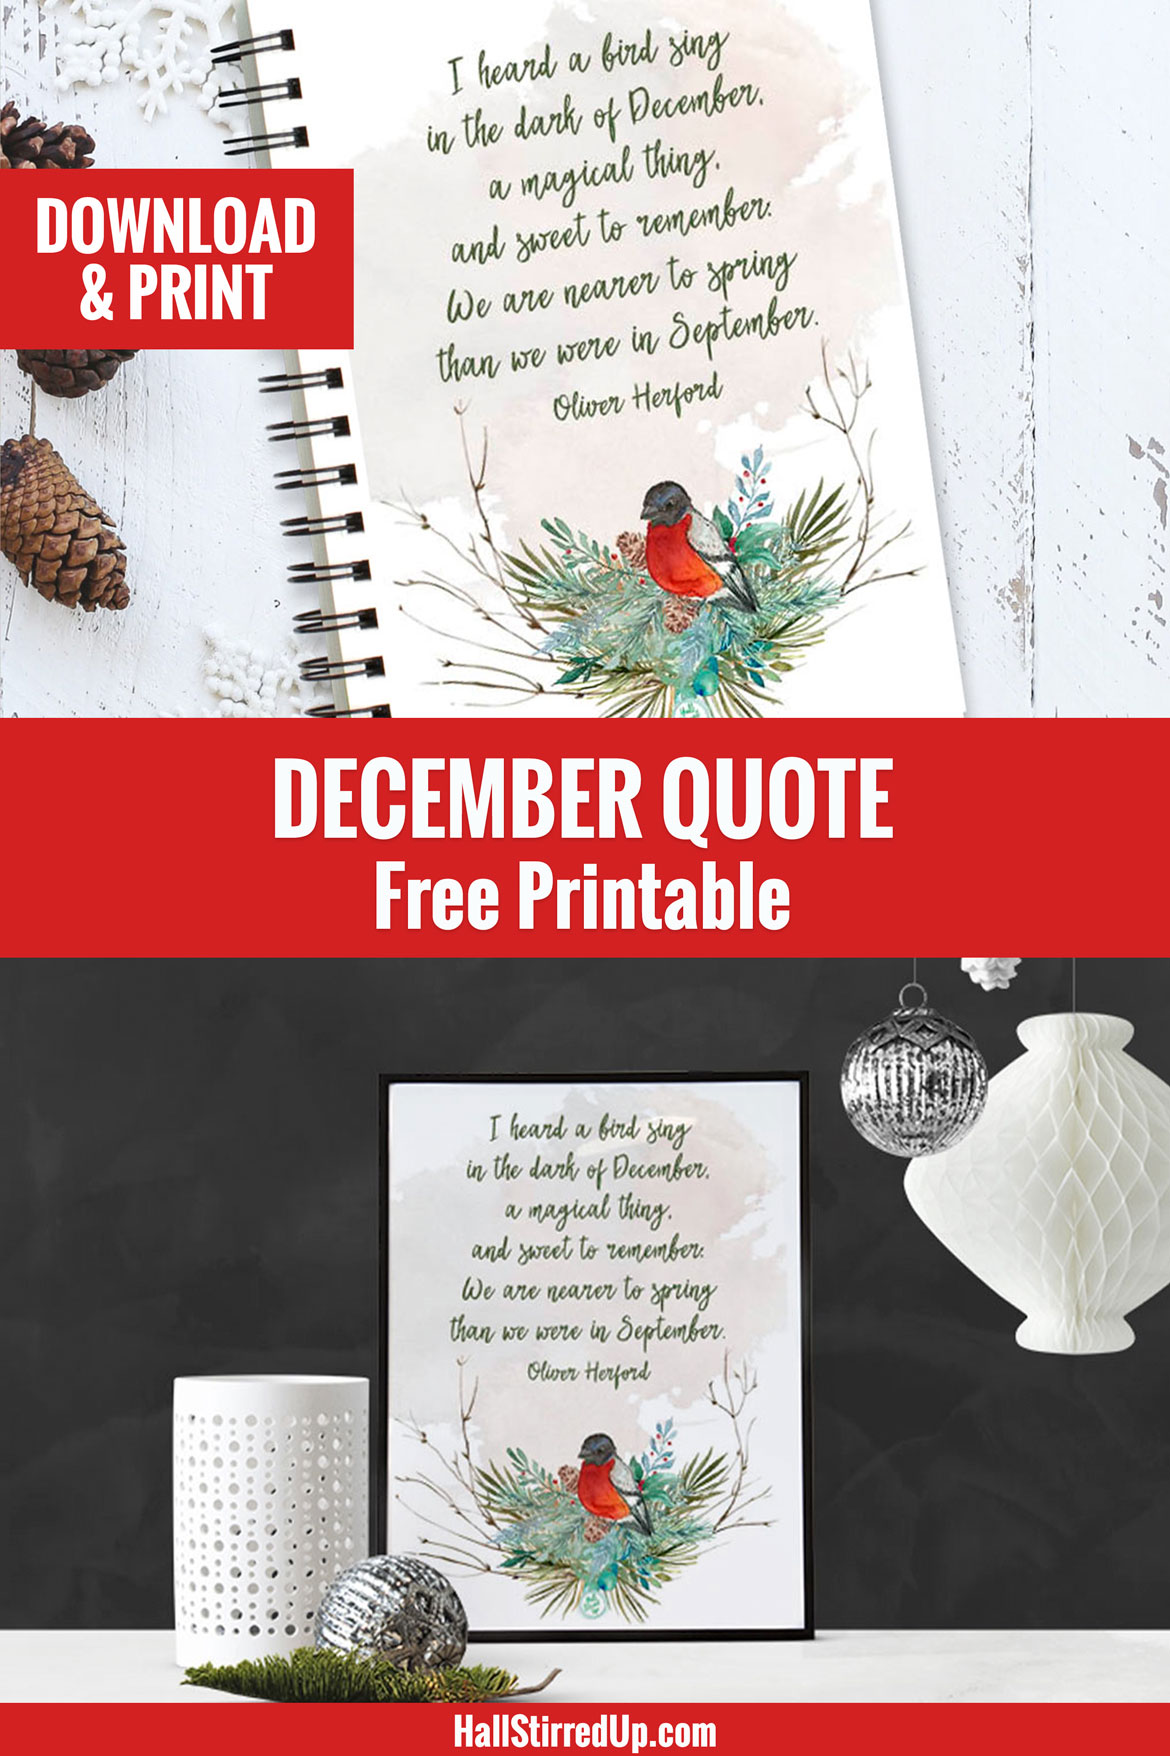 It's a new December Quote printable